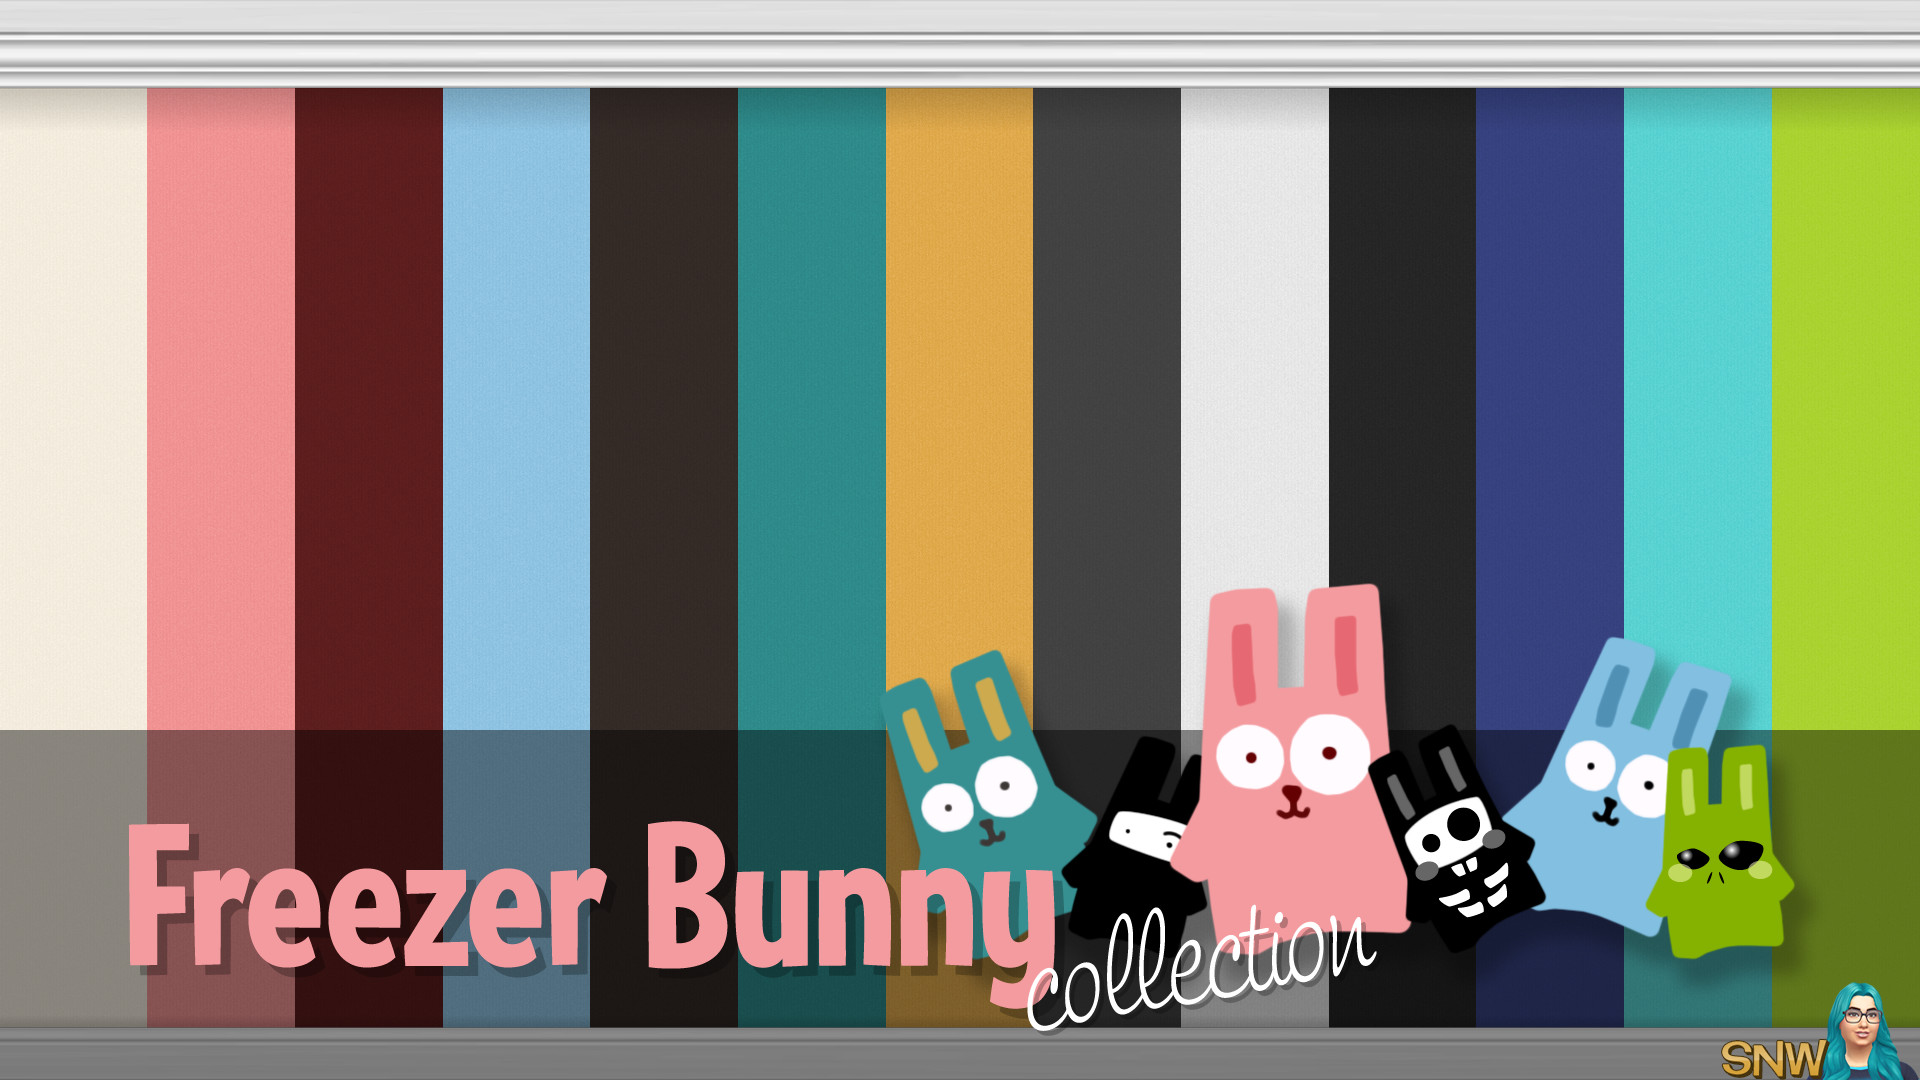 1920x1080 Freezer Bunny Collection: Plain Wallpapers. Find this Pin and more on The  Sims 4 CC ...